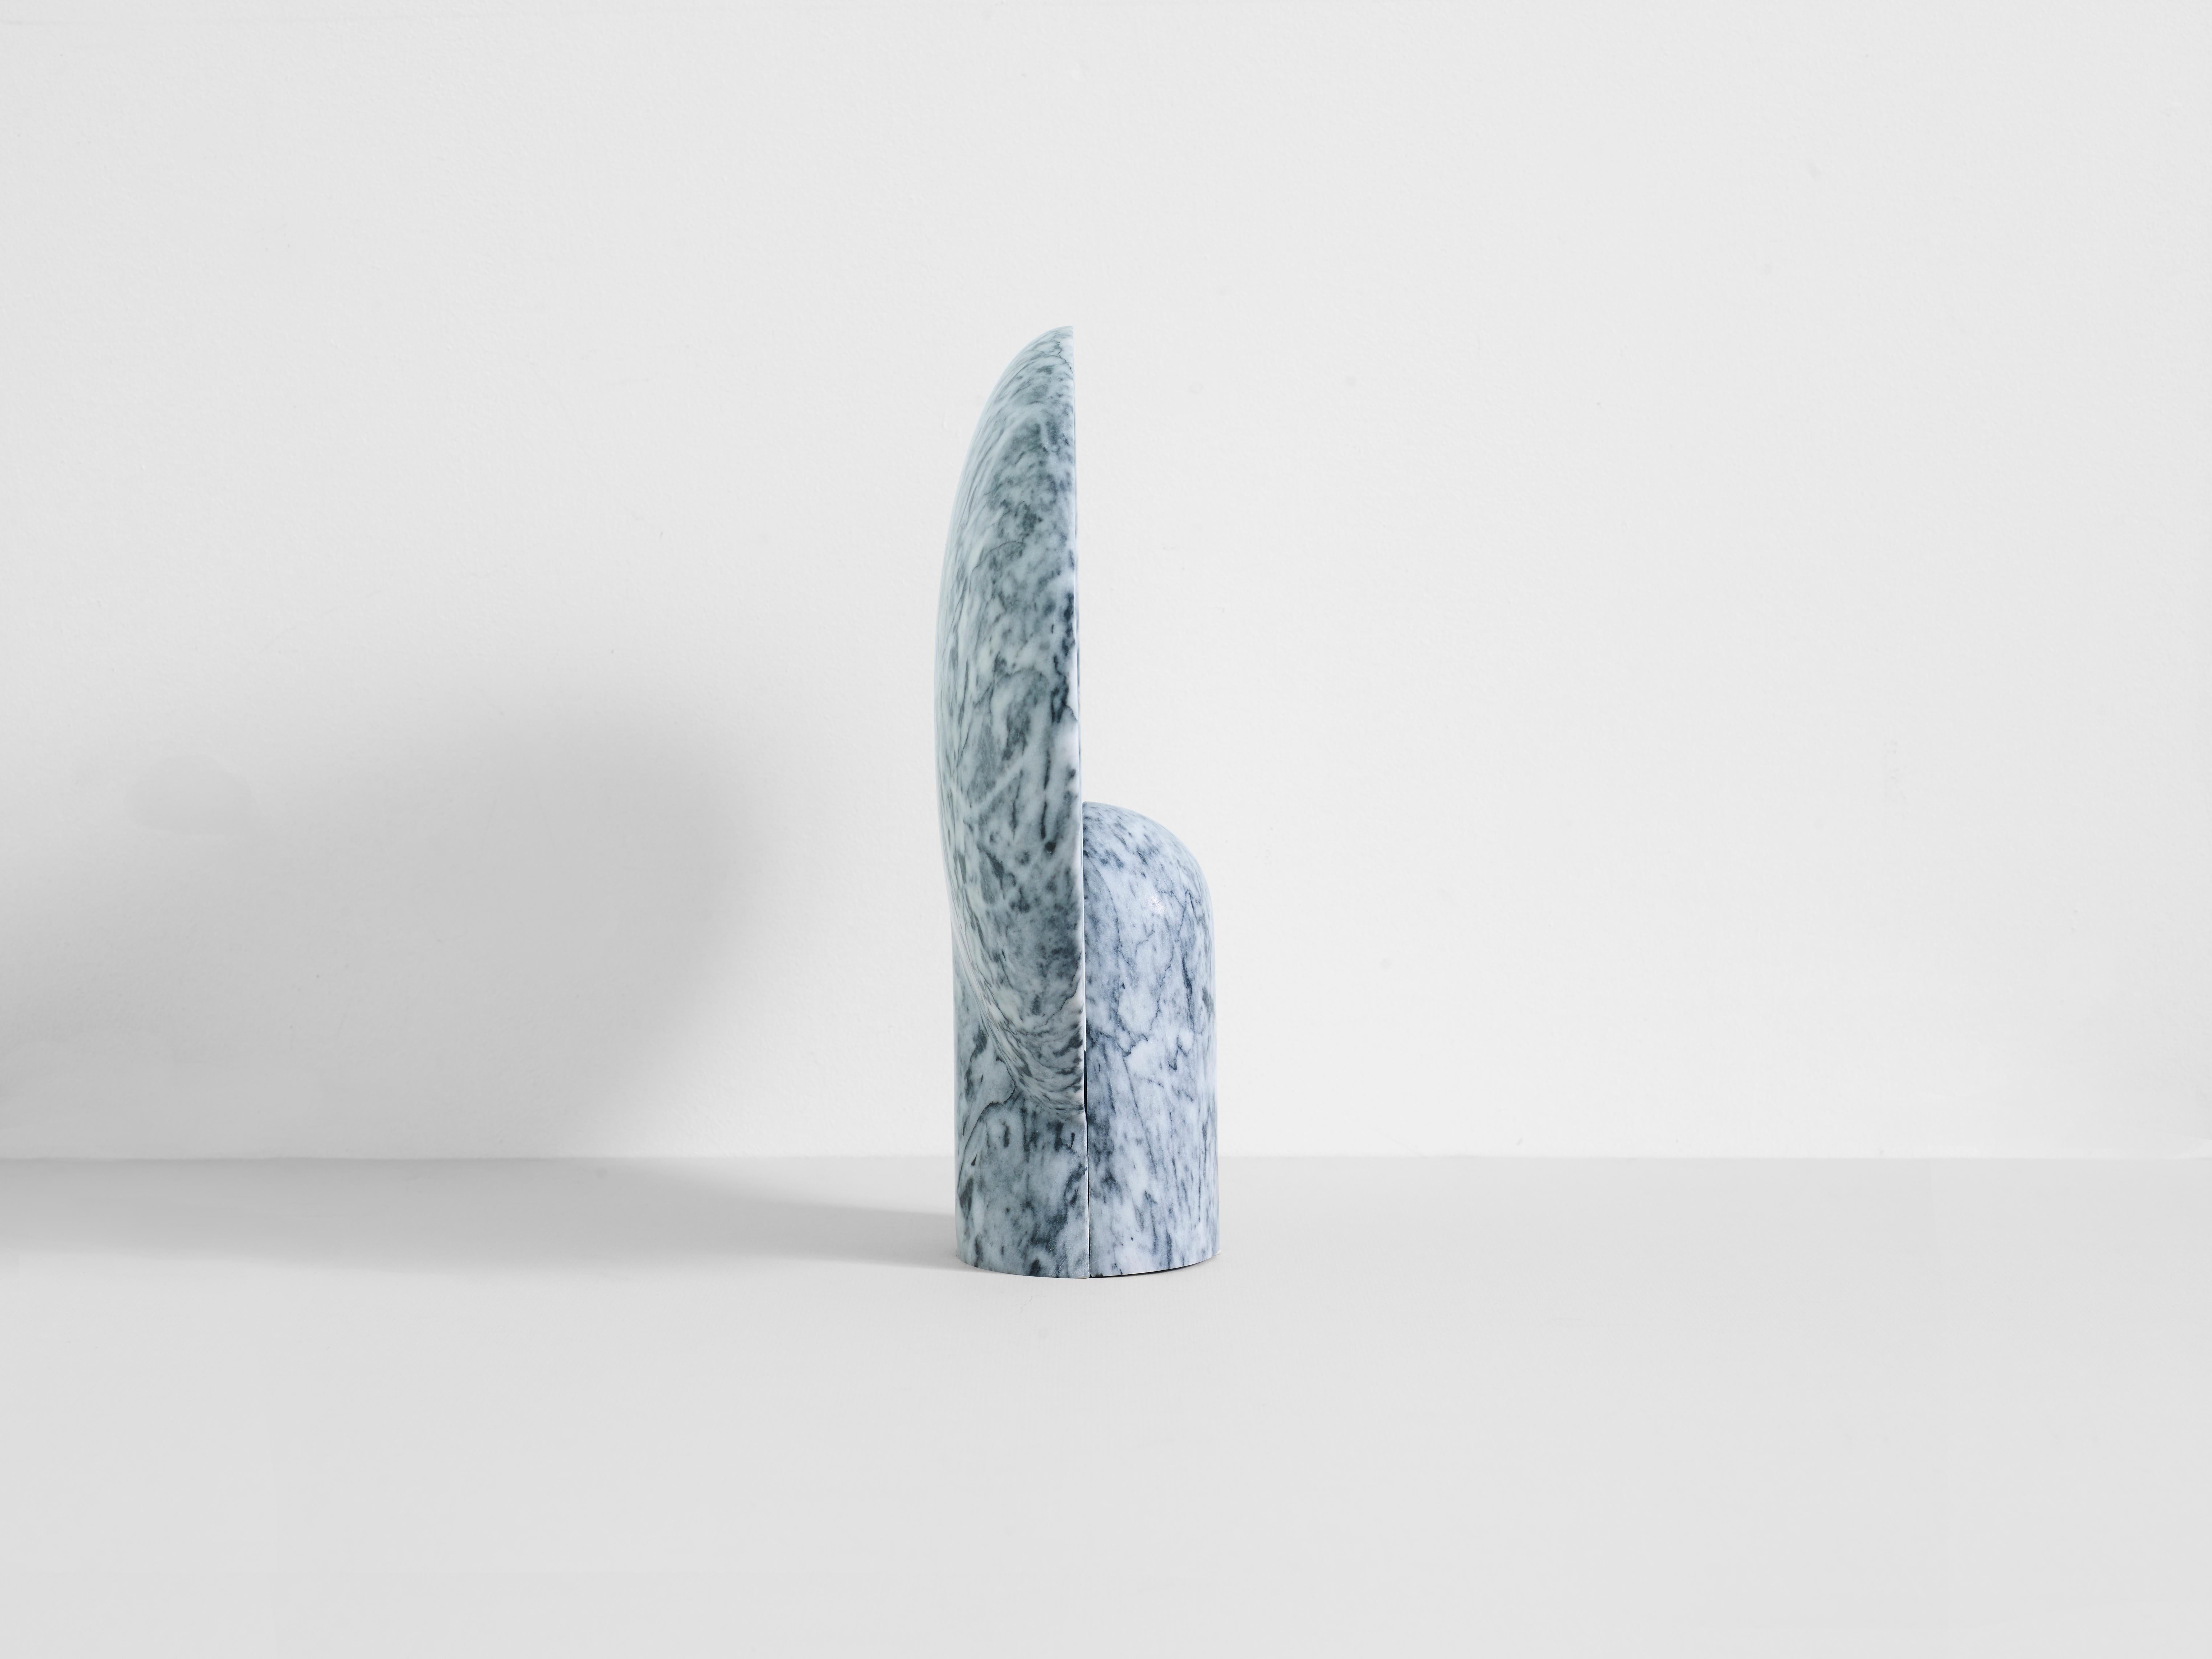 Duoro Surface Sconce by Henry Wilson
Dimensions: W 30 x D 11 x H 35 cm
Materials: Duoro Marble

This sculptural item is handmade in Sydney Australia.

The surface sconce in clear Gris Duoro marble is an ambient, sculptural light carved in two halves